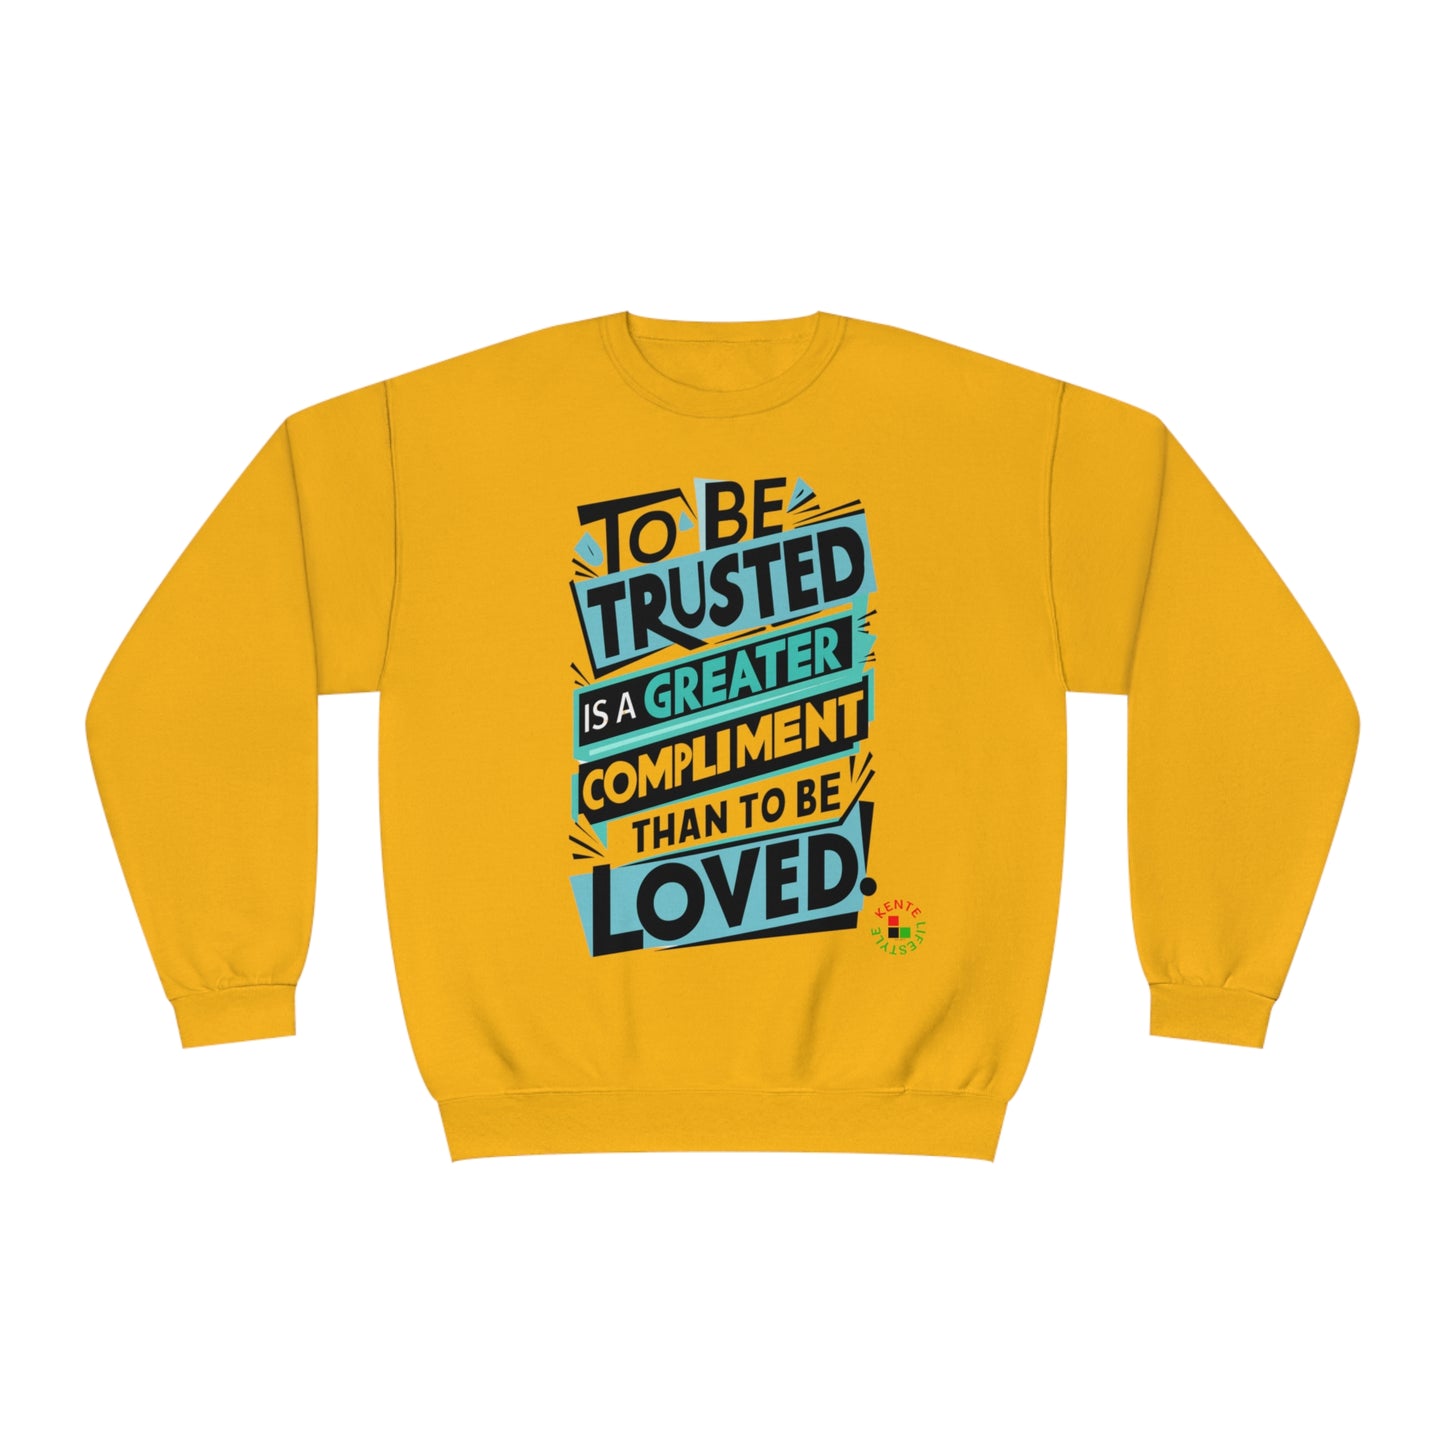 "To Be Trusted is a Greater Compliment than to be Loved" - Sweatshirt